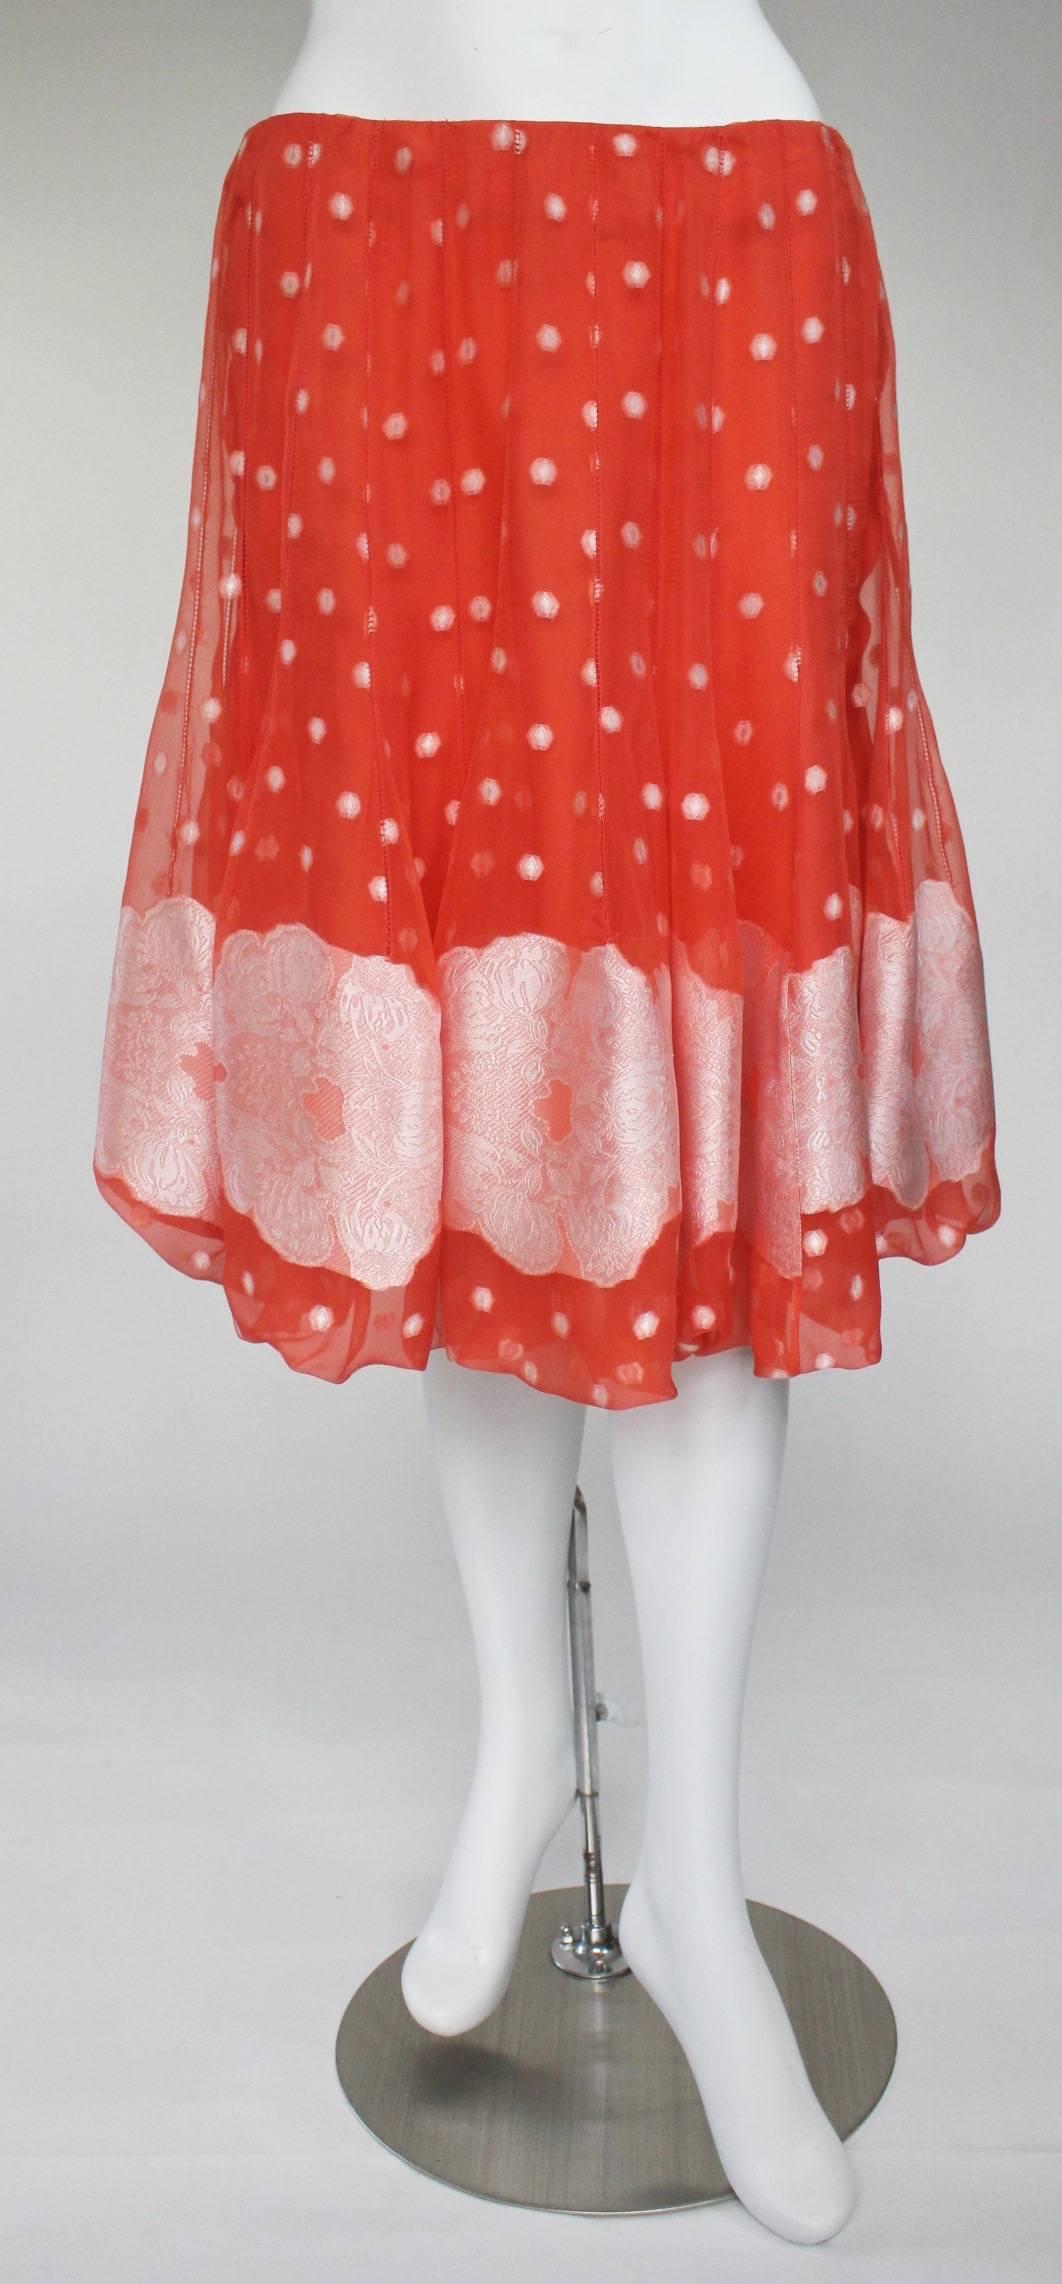 Women's Nina Ricci Tangerine and White Floral Embroidery Silk Skirt